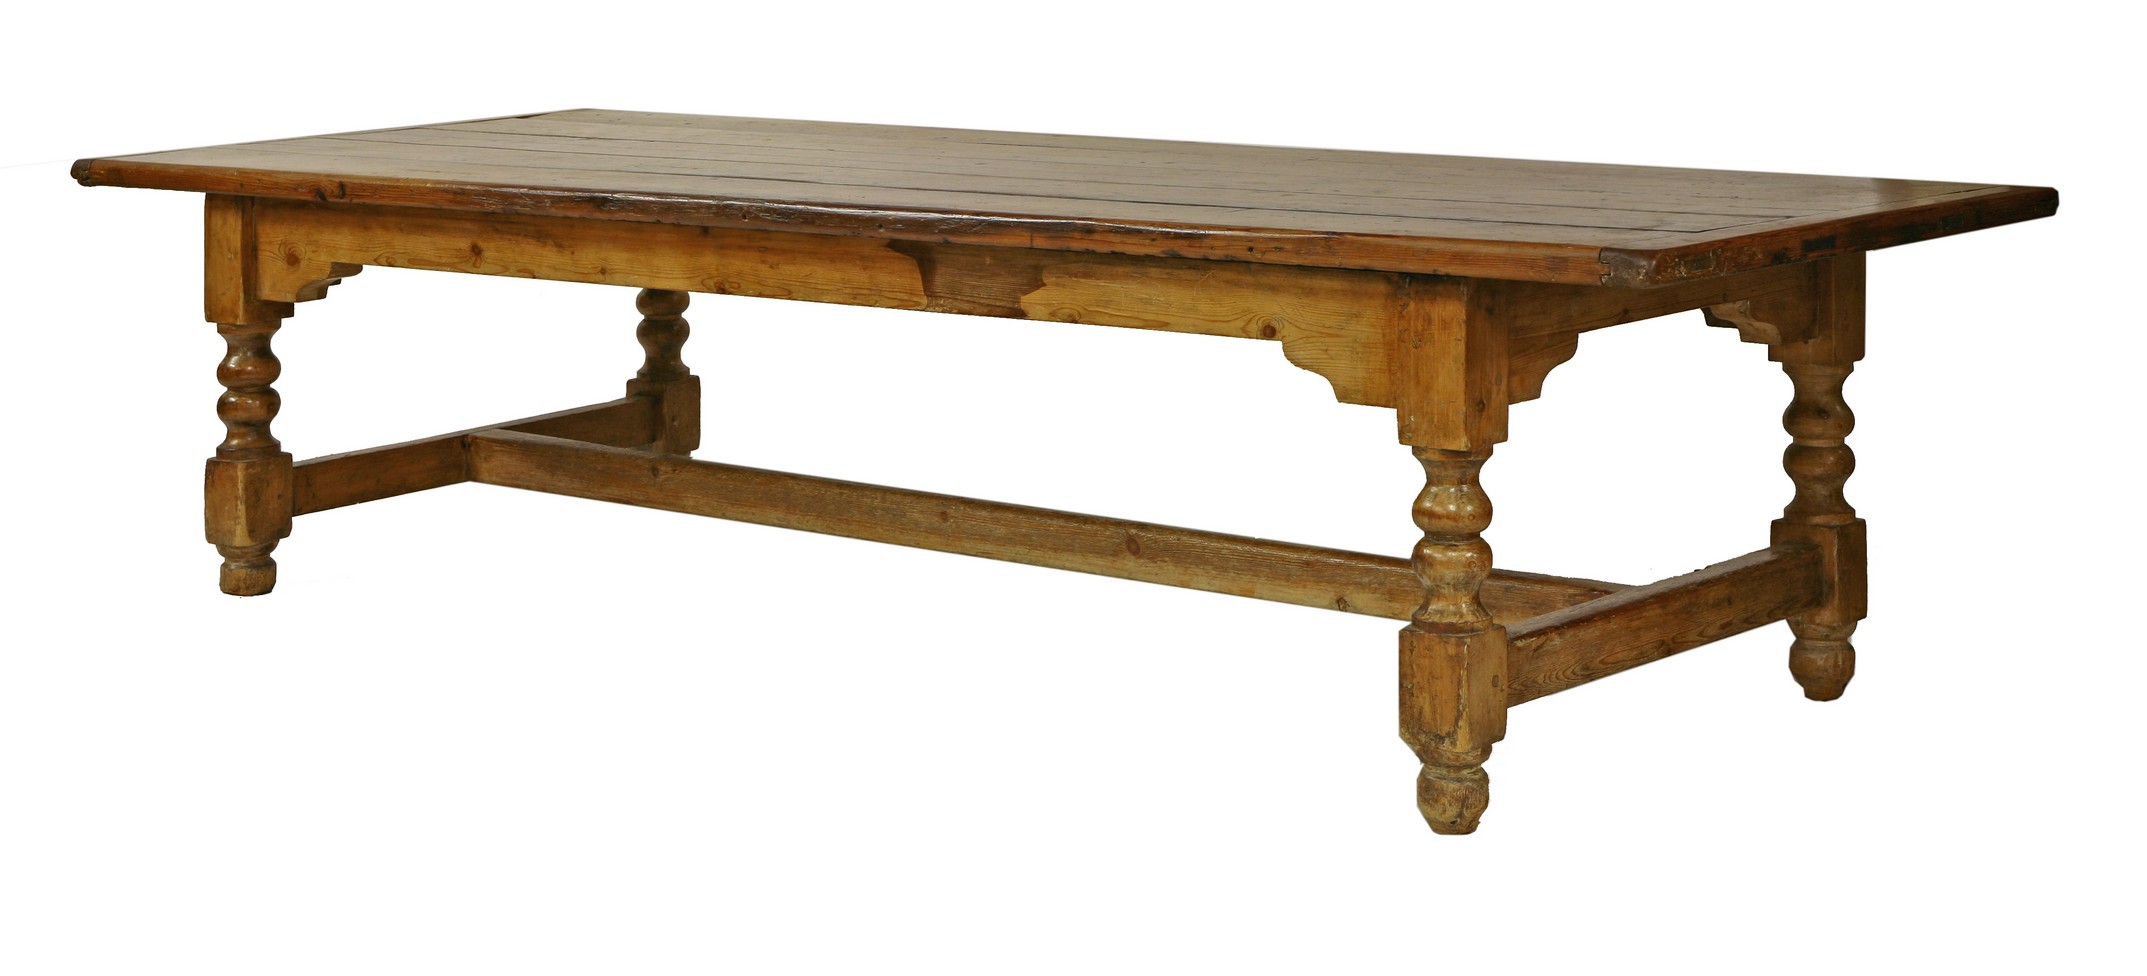 A large pine five-panel refectory table,
107cm wide
287cm long
72cm high approximately